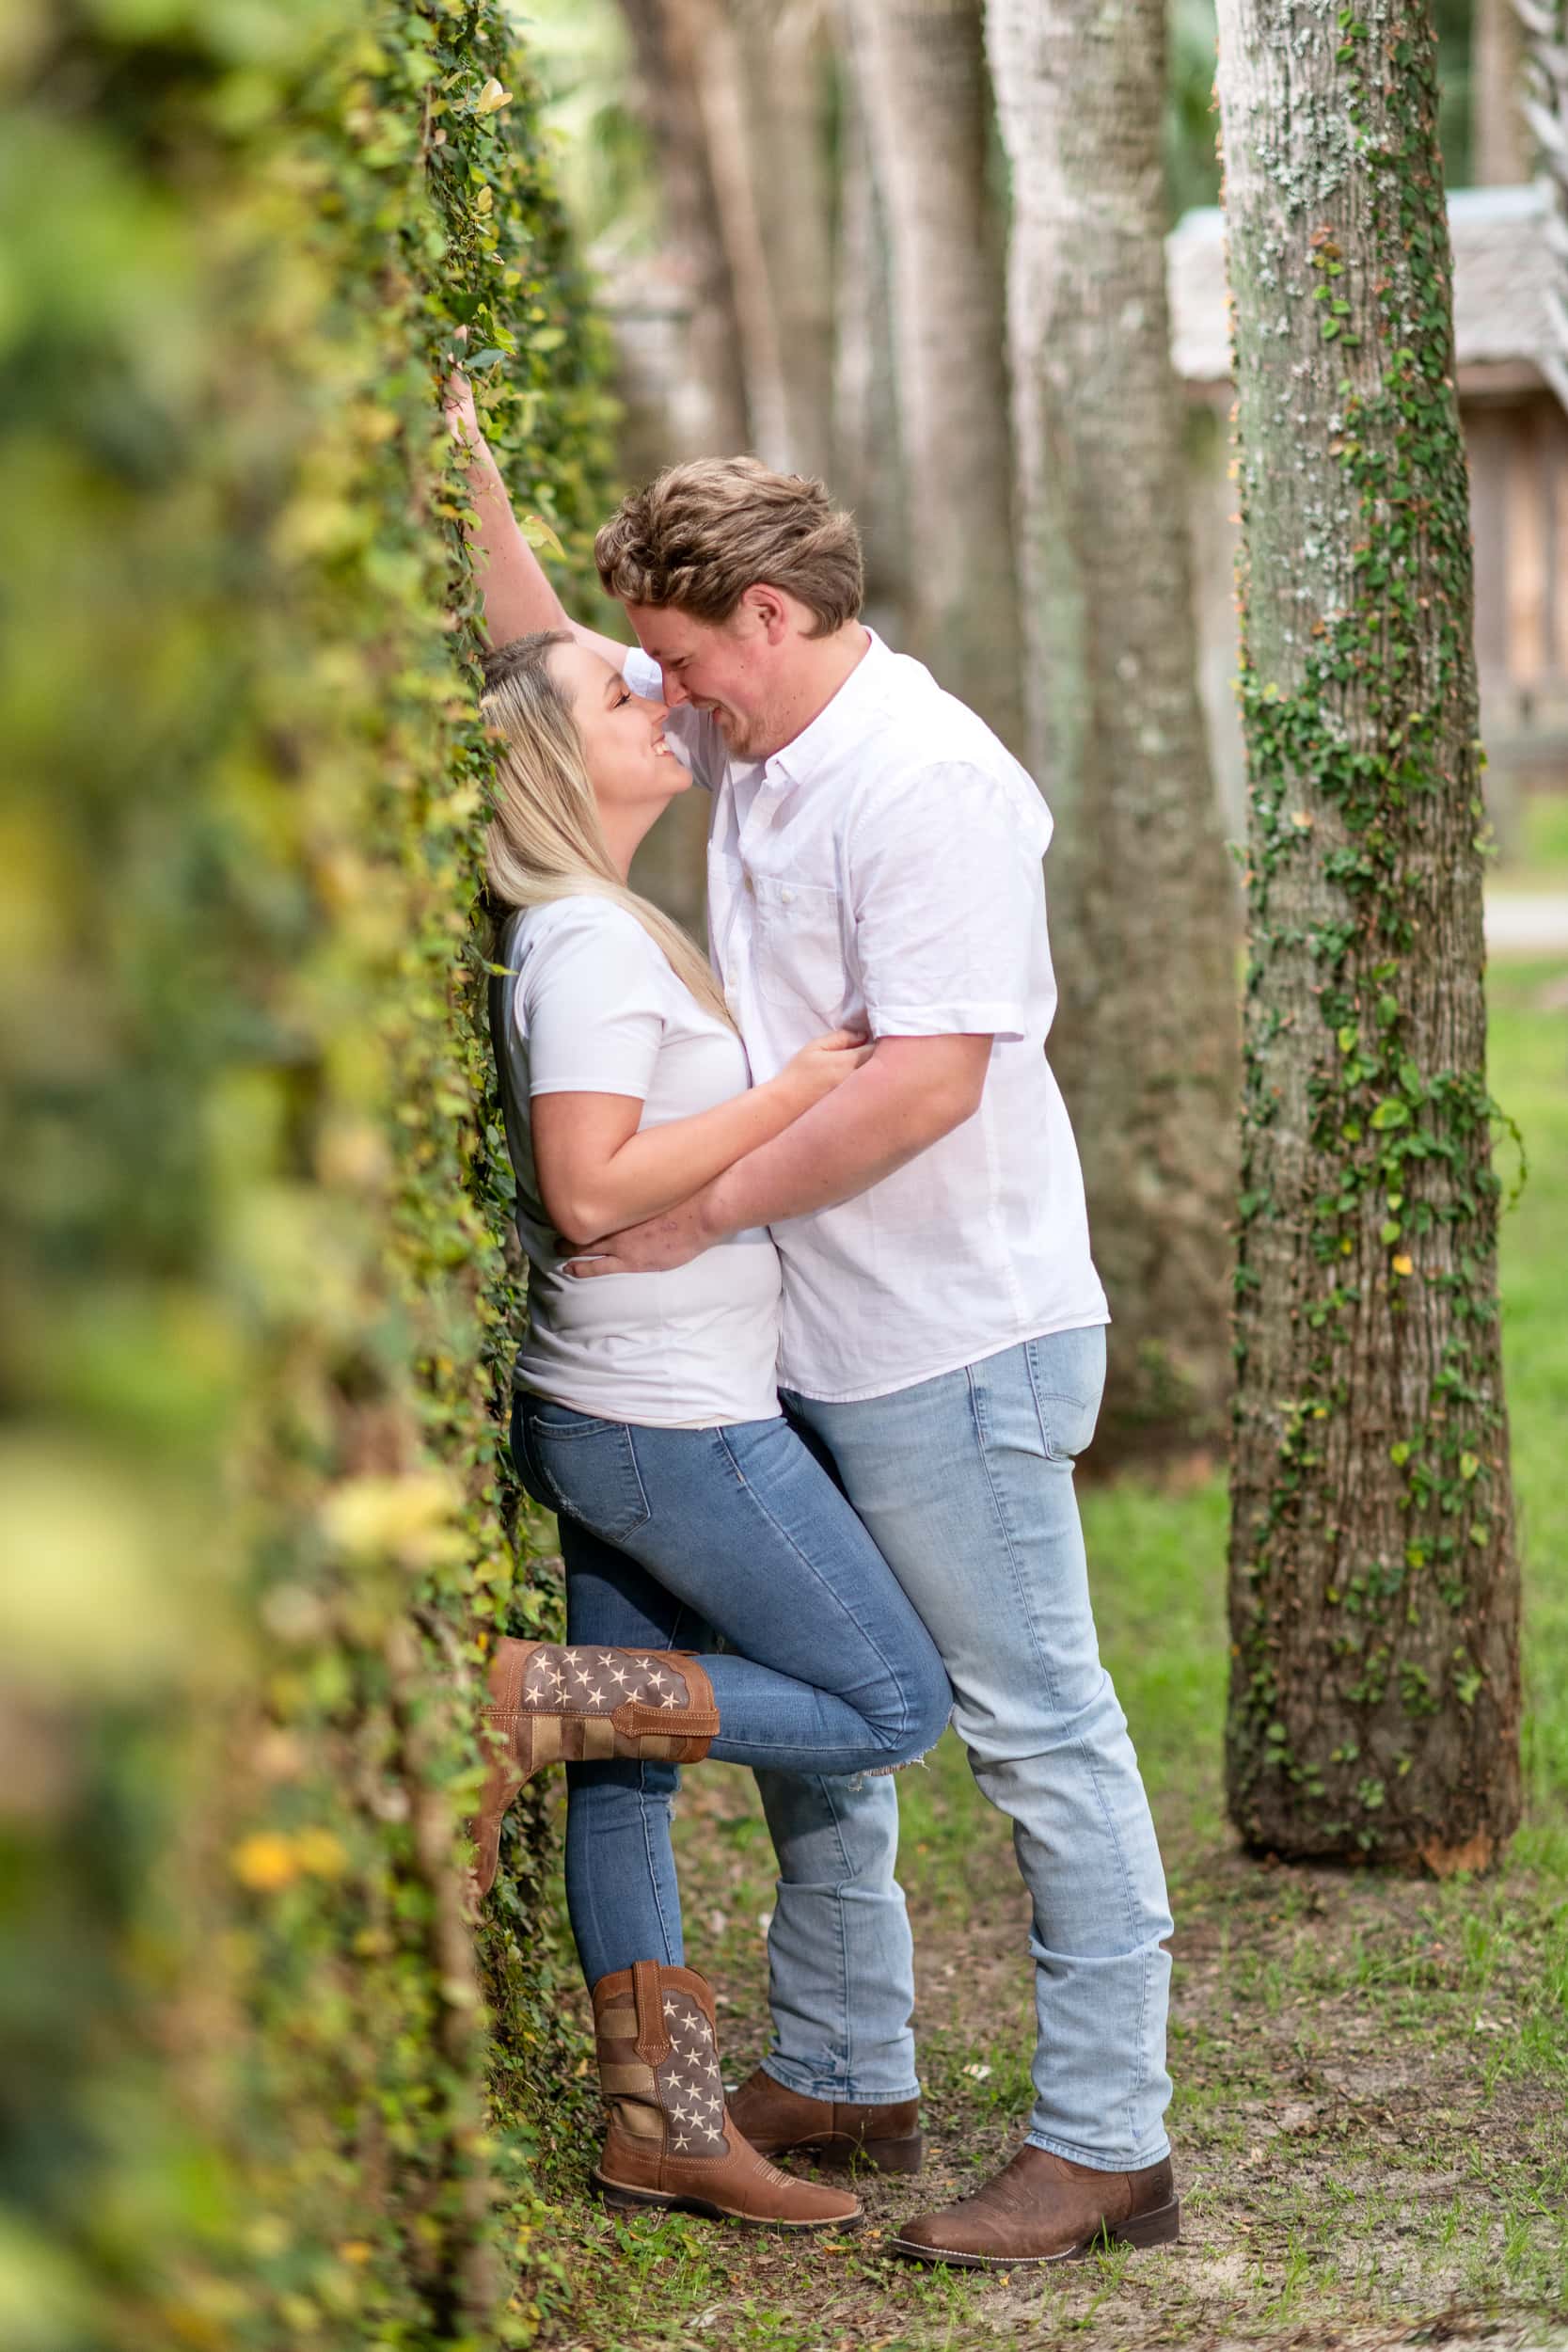 Leaning against the ivy for a kiss - Huntington Beach State Park